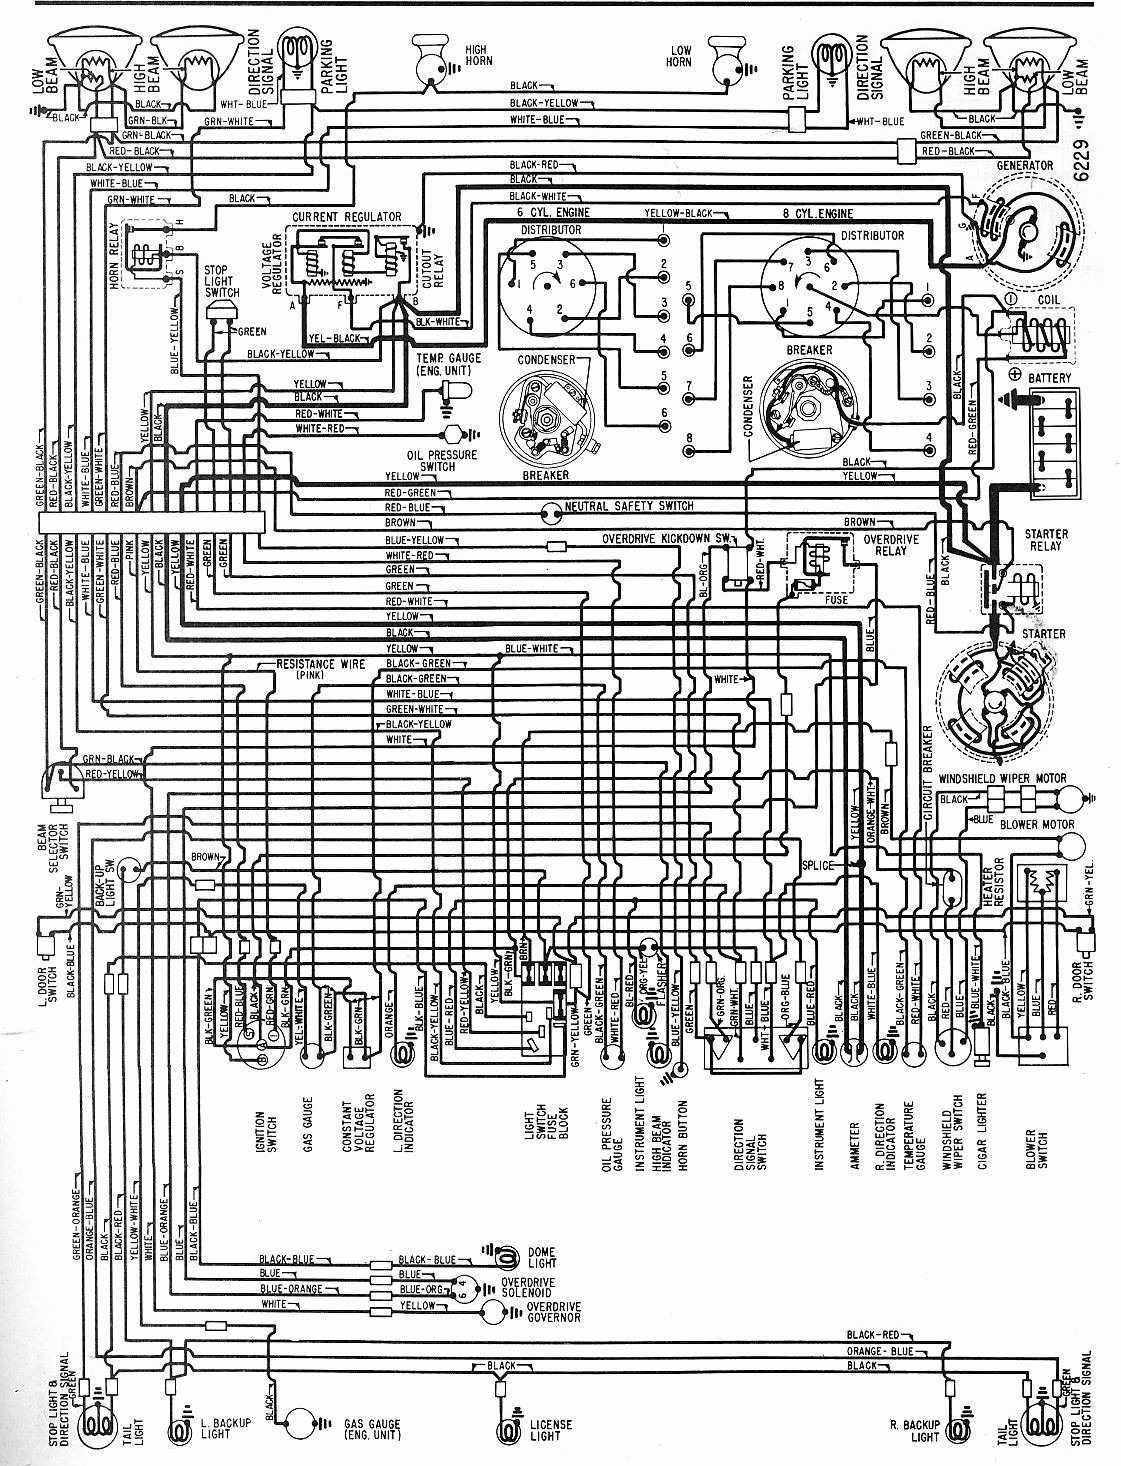 Solenoid Switch Wiring Diagram Awesome I Have A 1962 ford F100 with A 3 Speed W Od Trans I Need to Know